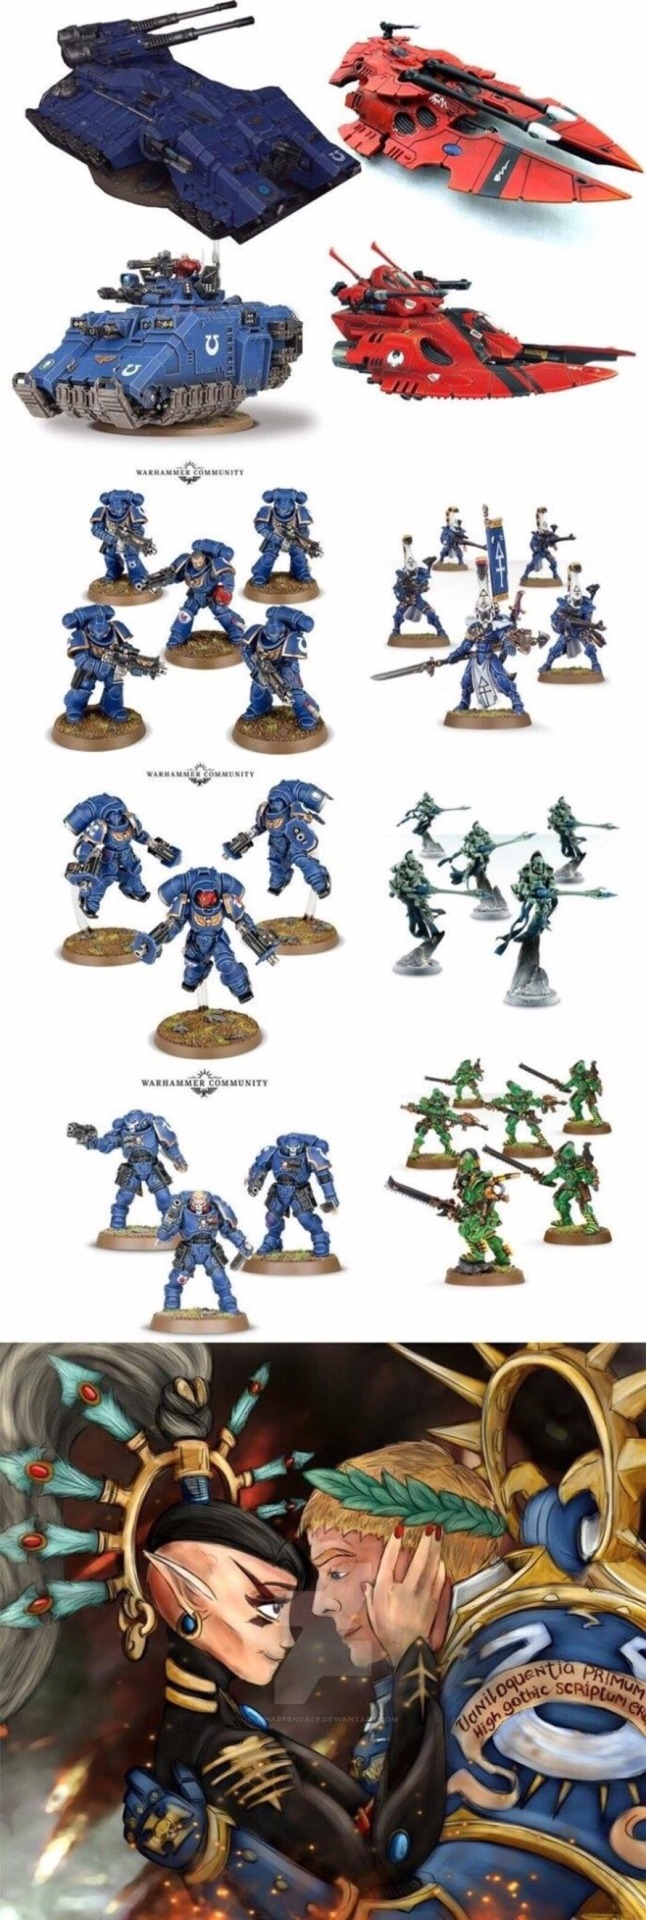 It seems the Imperium took a wrong turn - Warhammer 40k, Wh miniatures, Wh humor, Space Marine, Eldar, Xenophilia, Roboute guilliman, Longpost